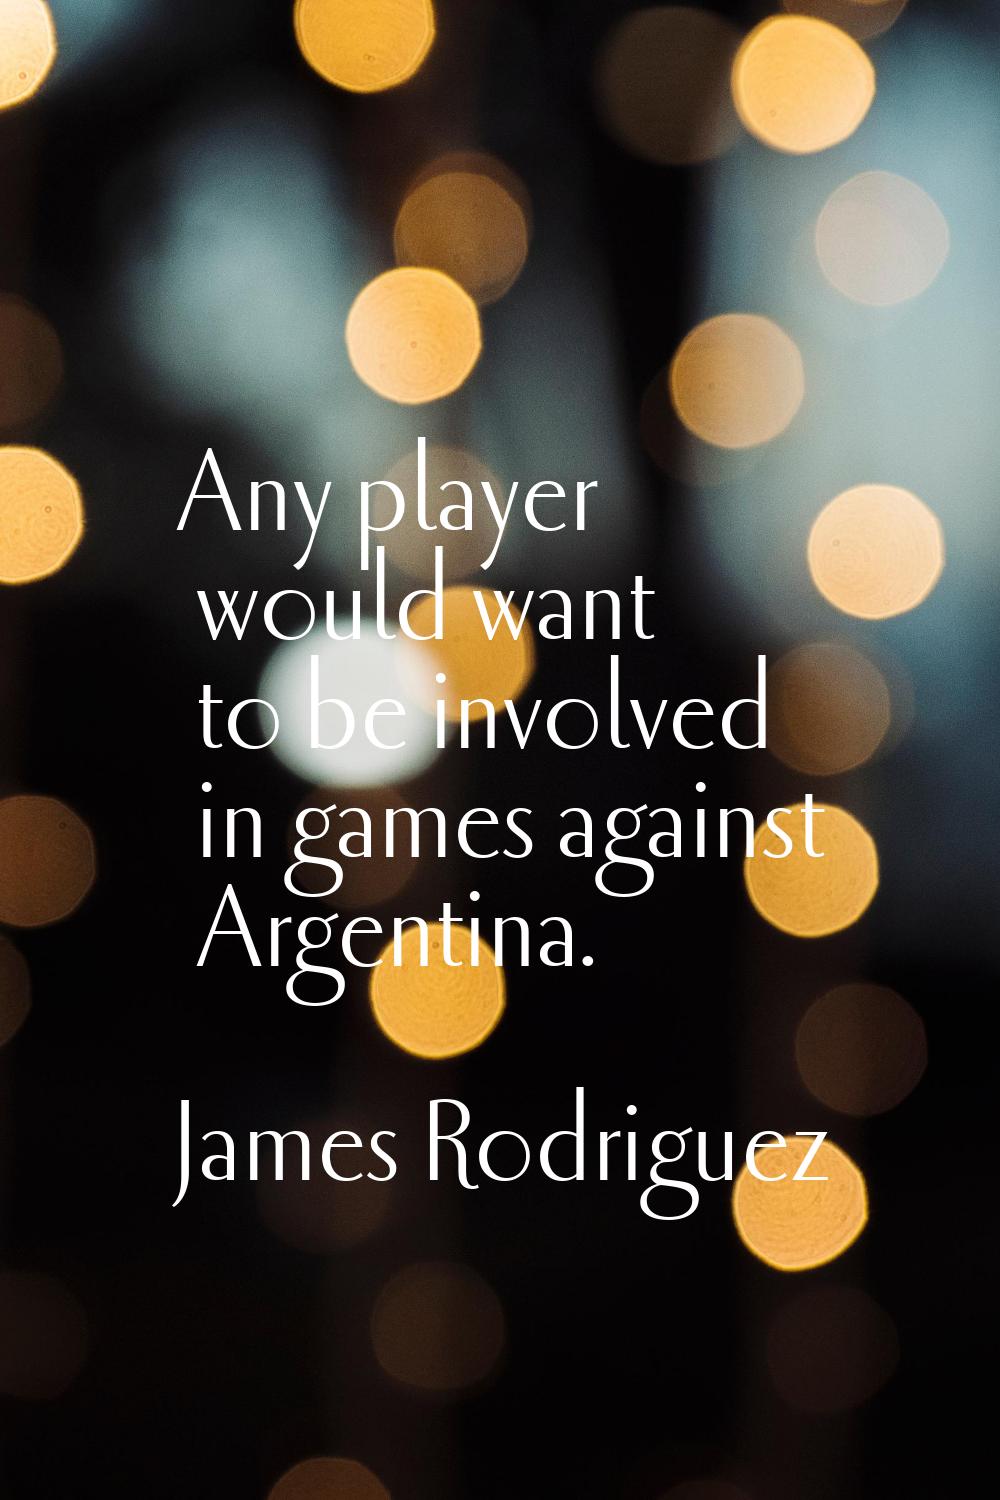 Any player would want to be involved in games against Argentina.